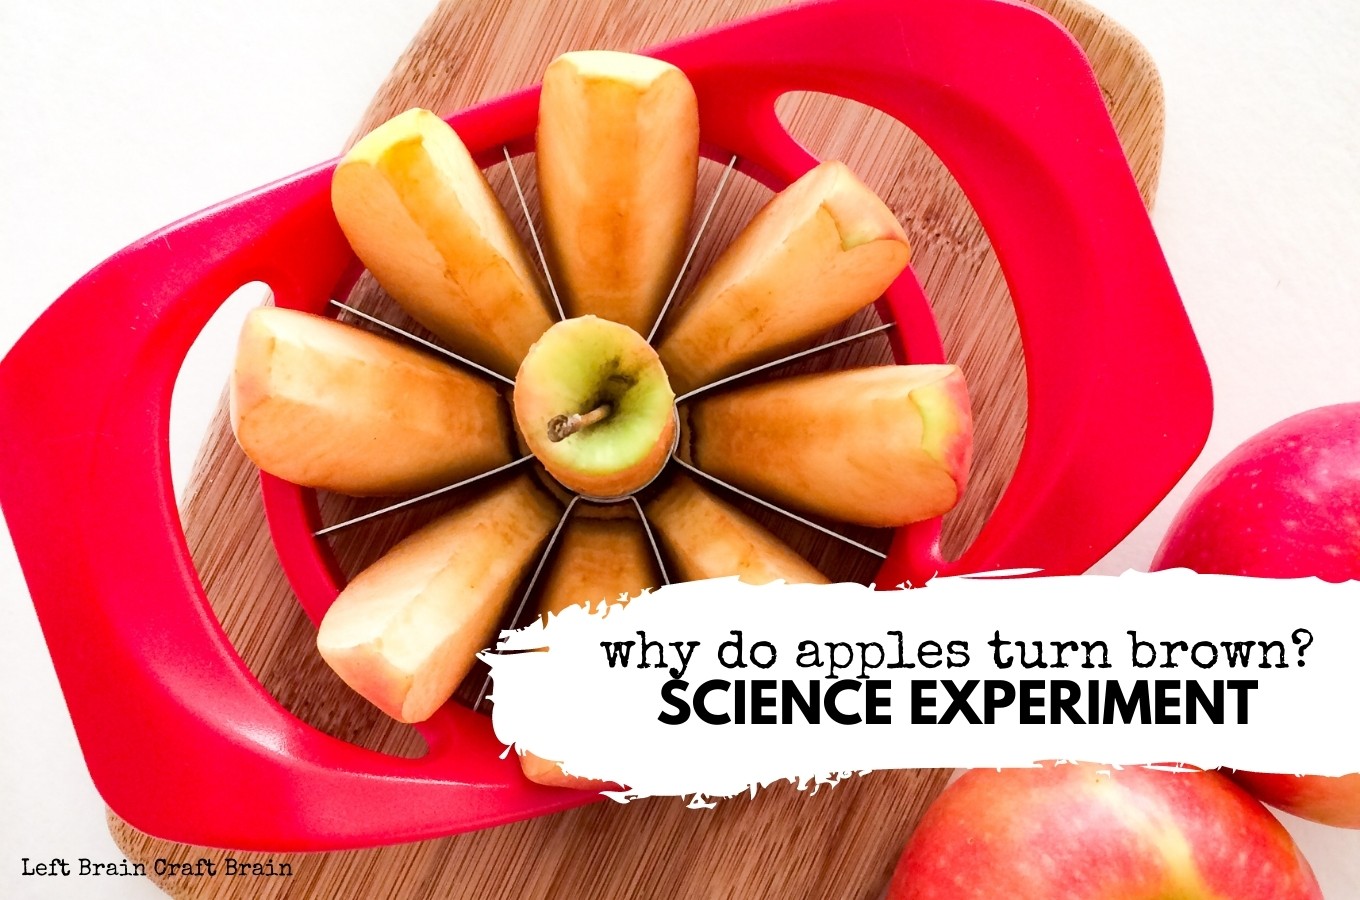 Why Do Apples Turn Brown? Science Experiment